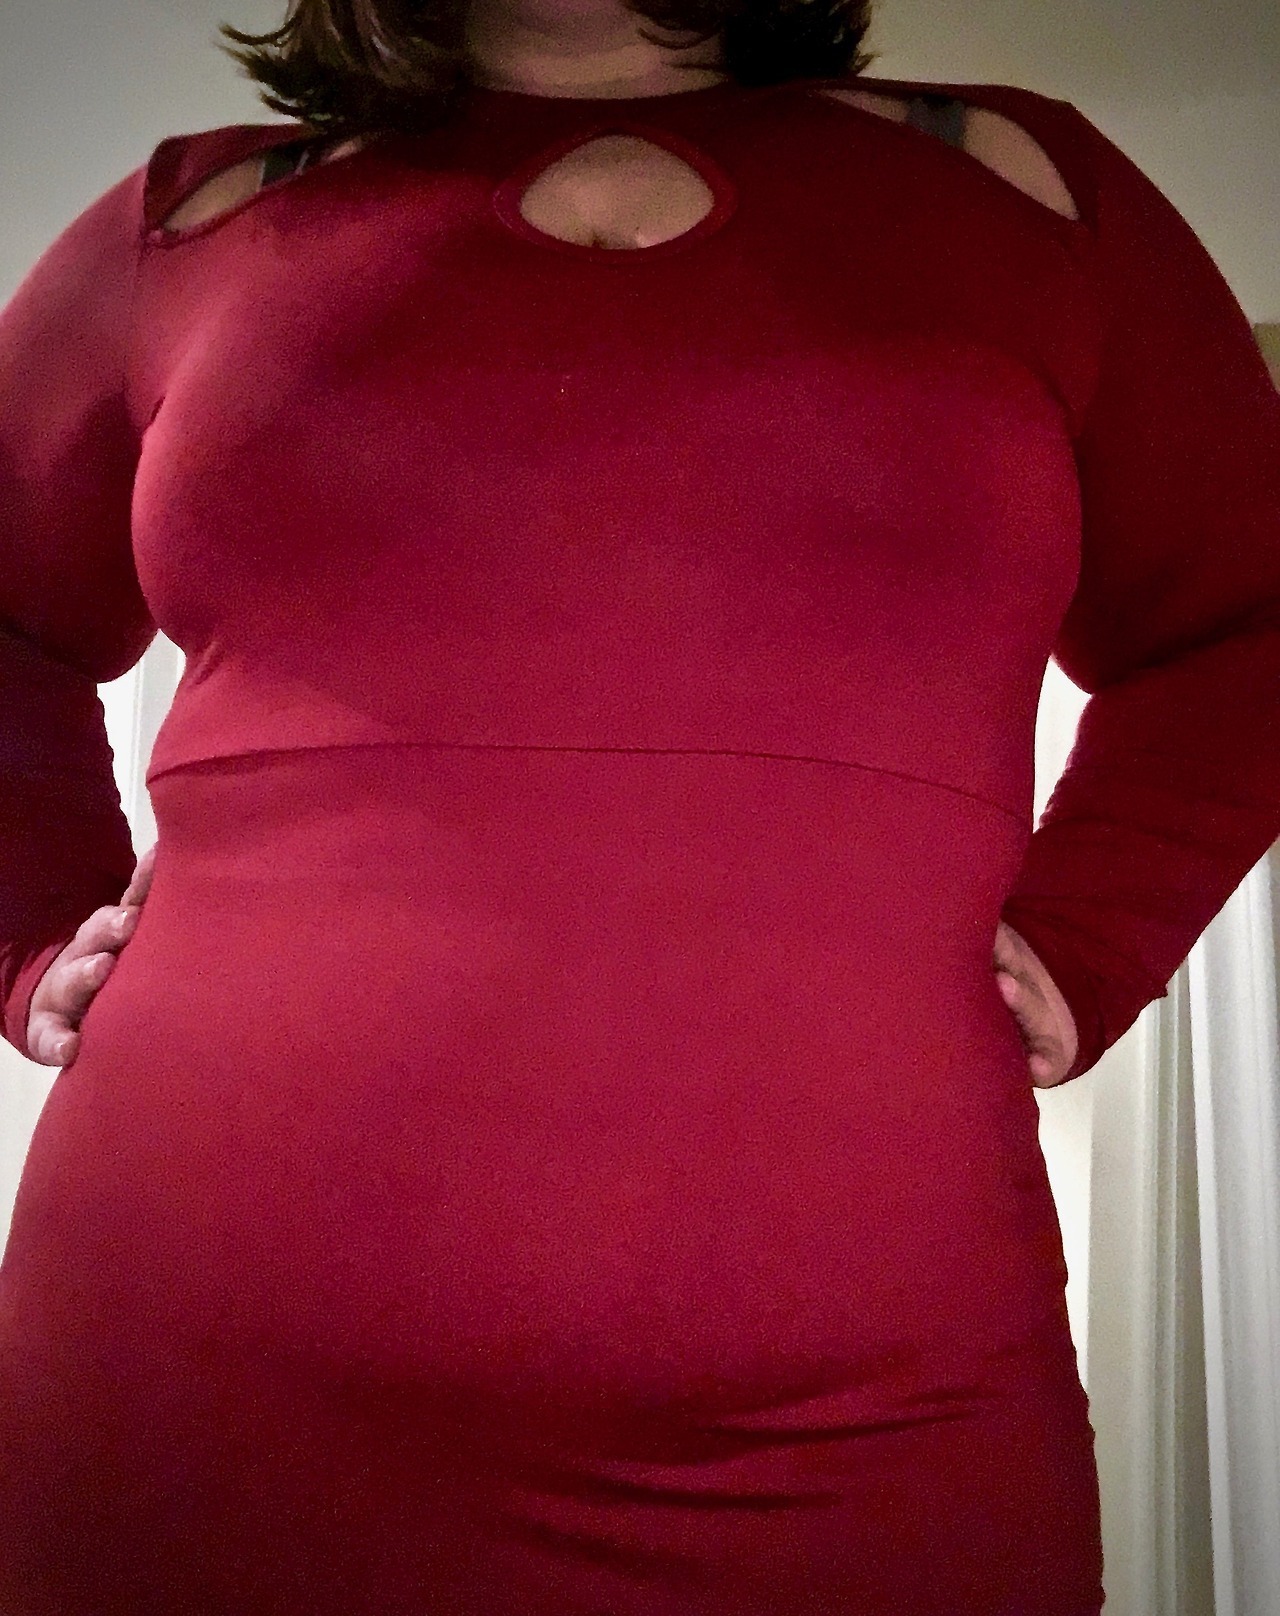 big-beautiful-princess:  Just bought this bright red dress. It is super tight and